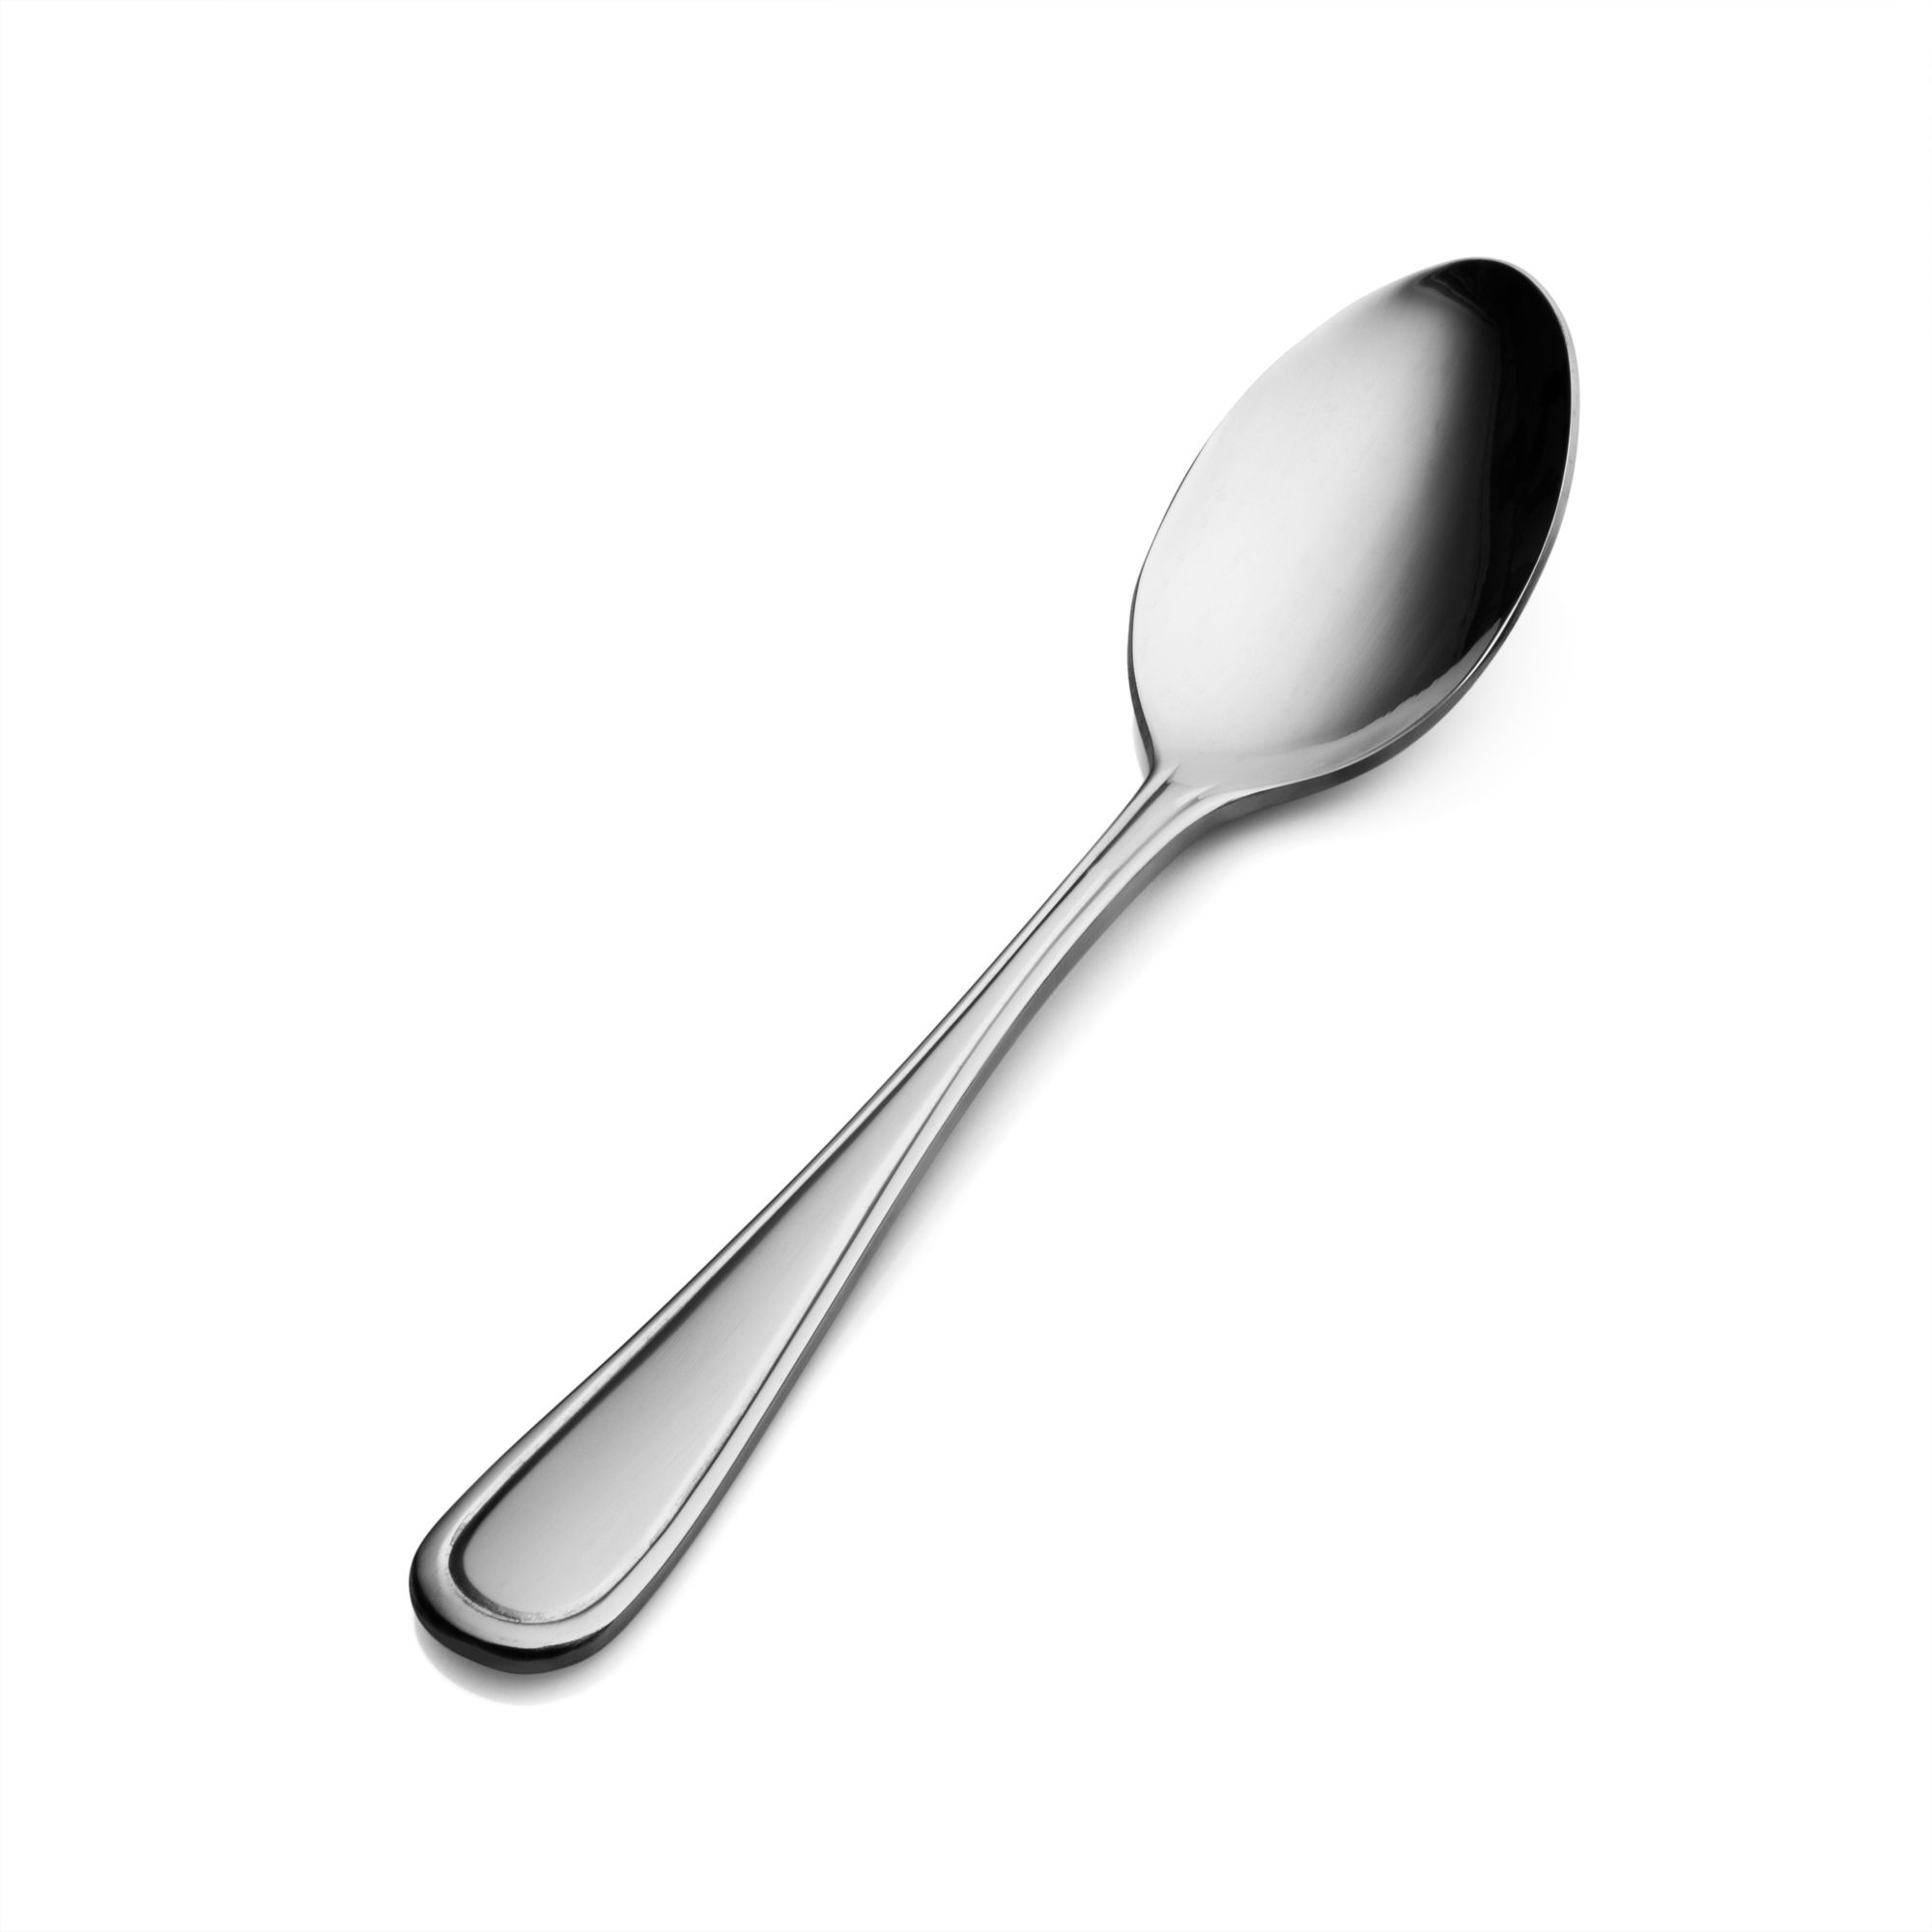 Bon Chef S303 Tuscany 18/8 Stainless Steel Soup and Dessert Spoon